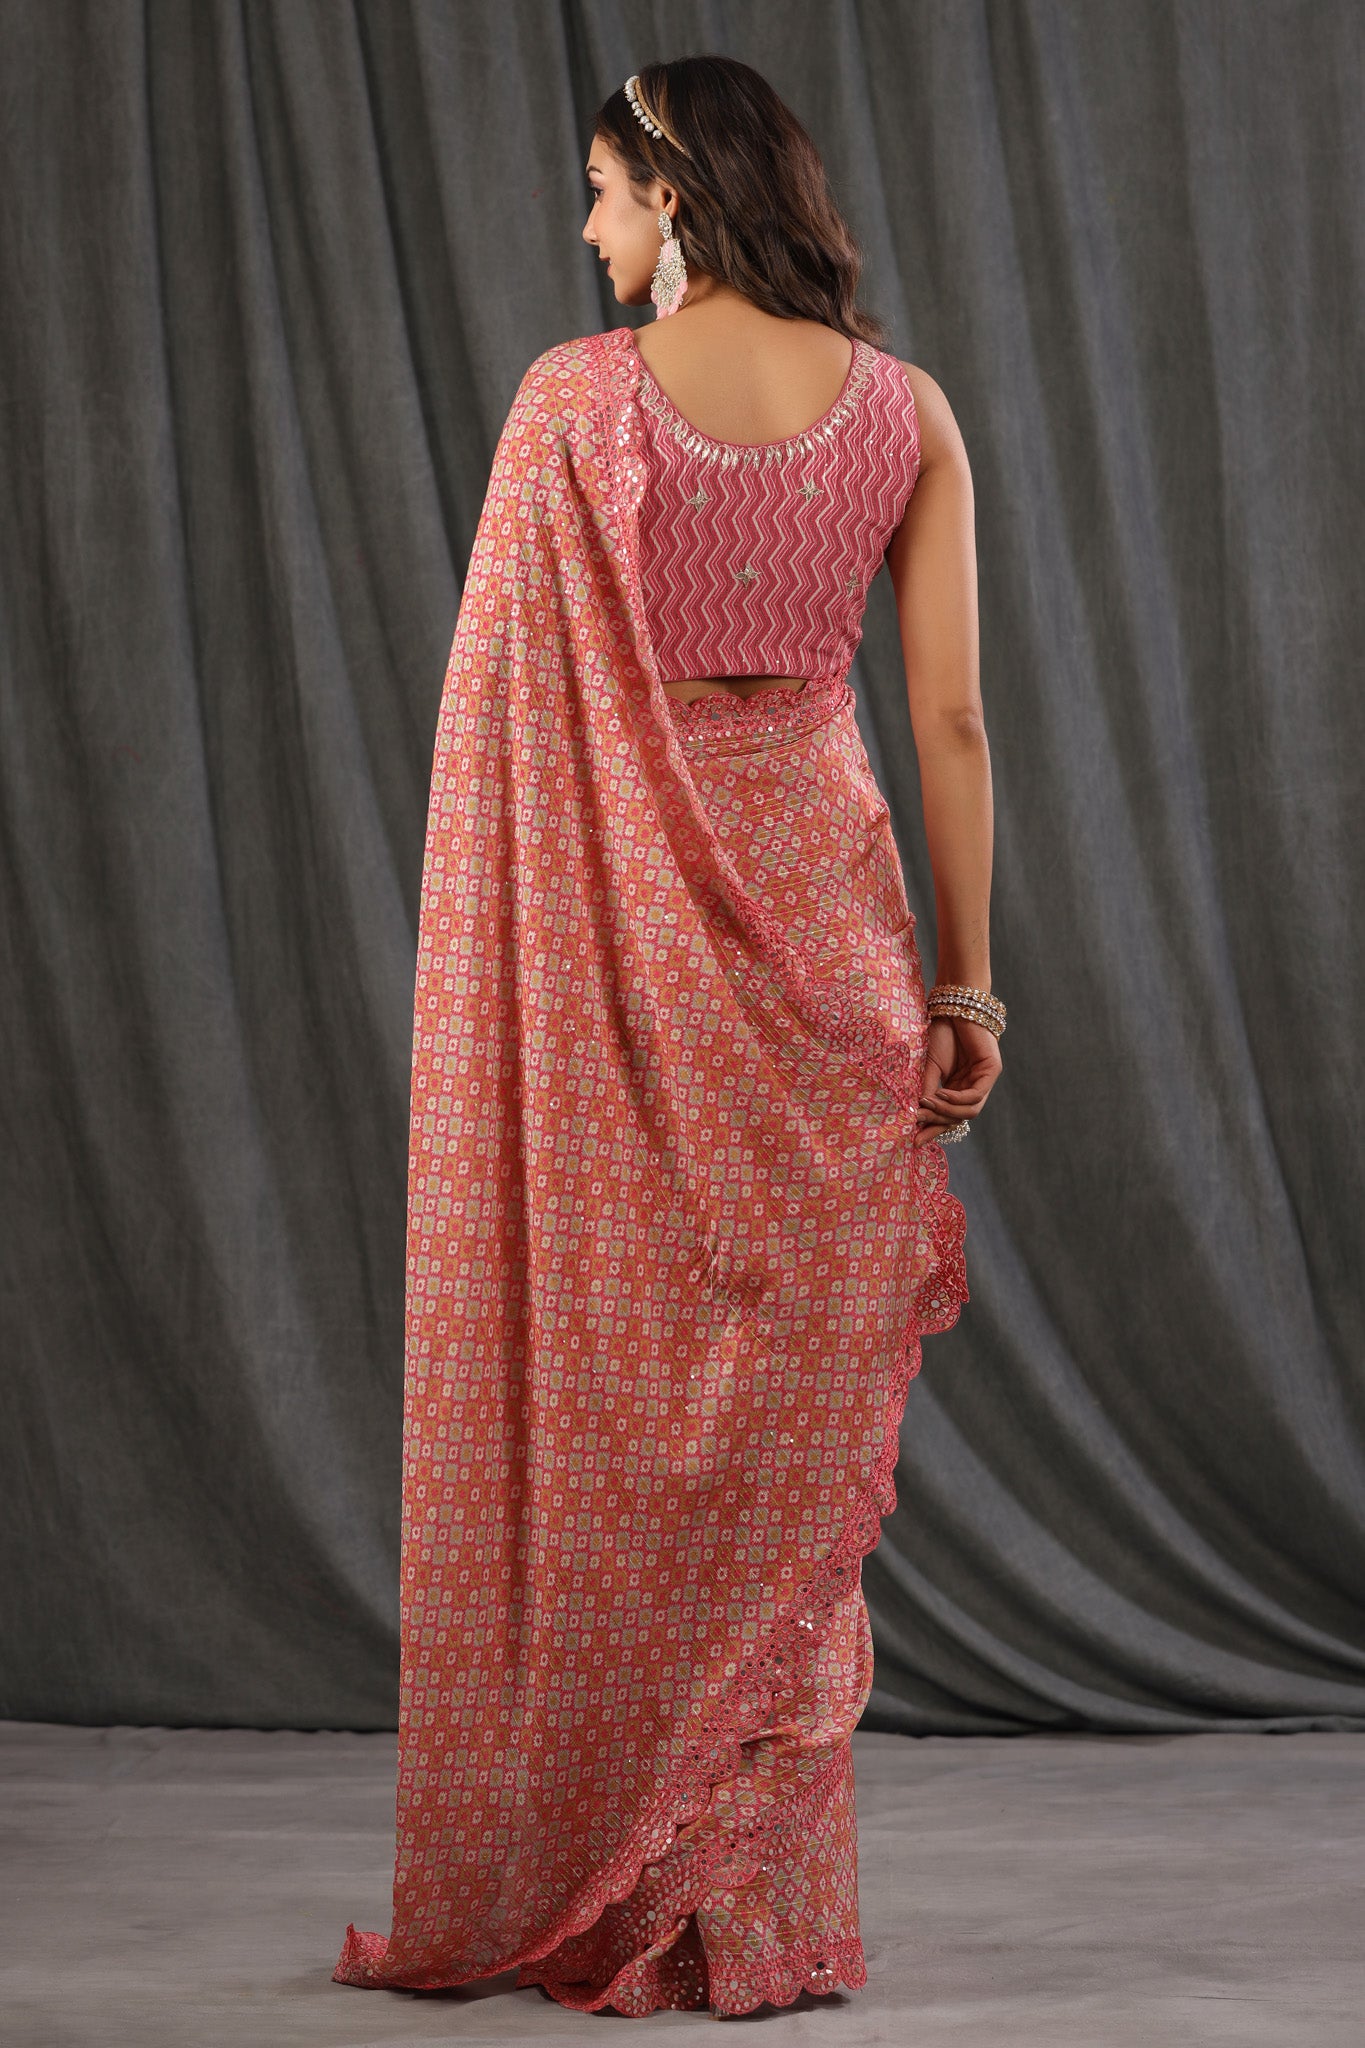 Buy pink printed crepe georgette saree online in USA with scalloped border. Make a fashion statement at weddings with stunning designer sarees, embroidered sarees with blouse, wedding sarees, handloom sarees from Pure Elegance Indian fashion store in USA.-back